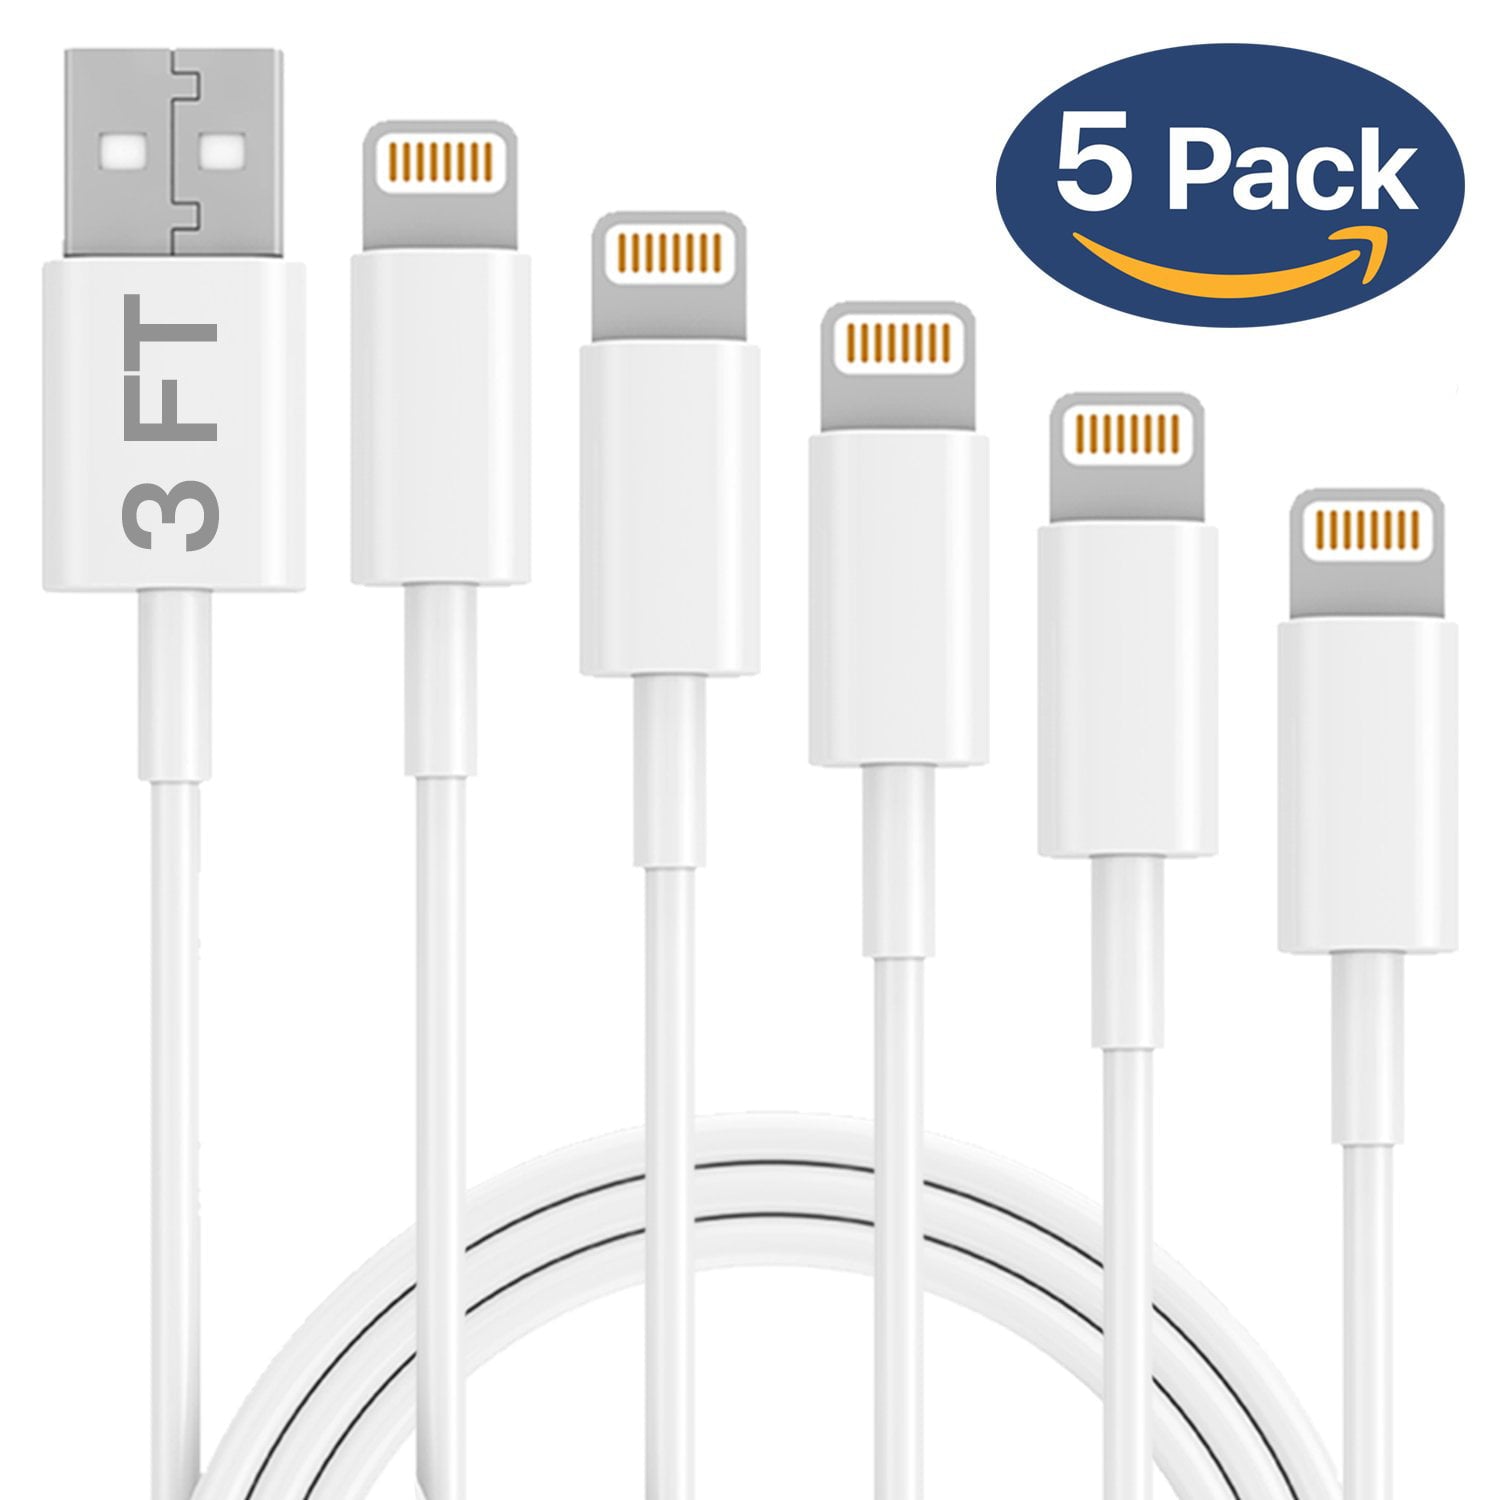 Petal 2.1Amp High-Power White Charger Lightning Cable for iPhone11 Pro, 13 Pro, 13 Pro Max, Xs, XS Max, X, 8, 8 Plus, 7, 7 Plus, 6S, 6, 6 Plus, 5S, iPad Mini Pack of 5